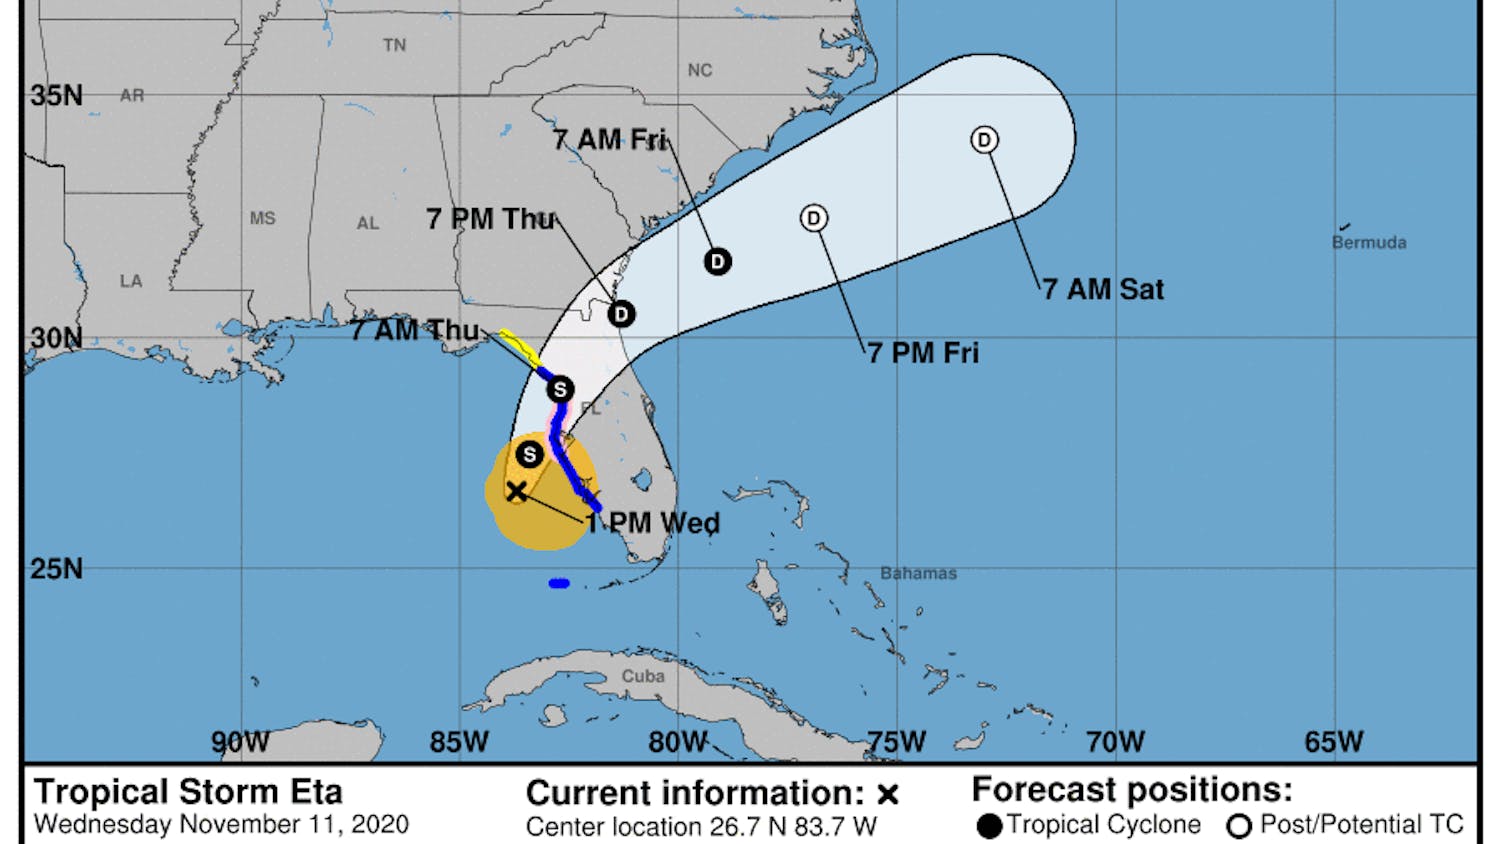 The storm, with sustained winds of 75 mph, is centered roughly 140 miles southwest of Tampa, and is moving to the northeast as of Wednesday afternoon.